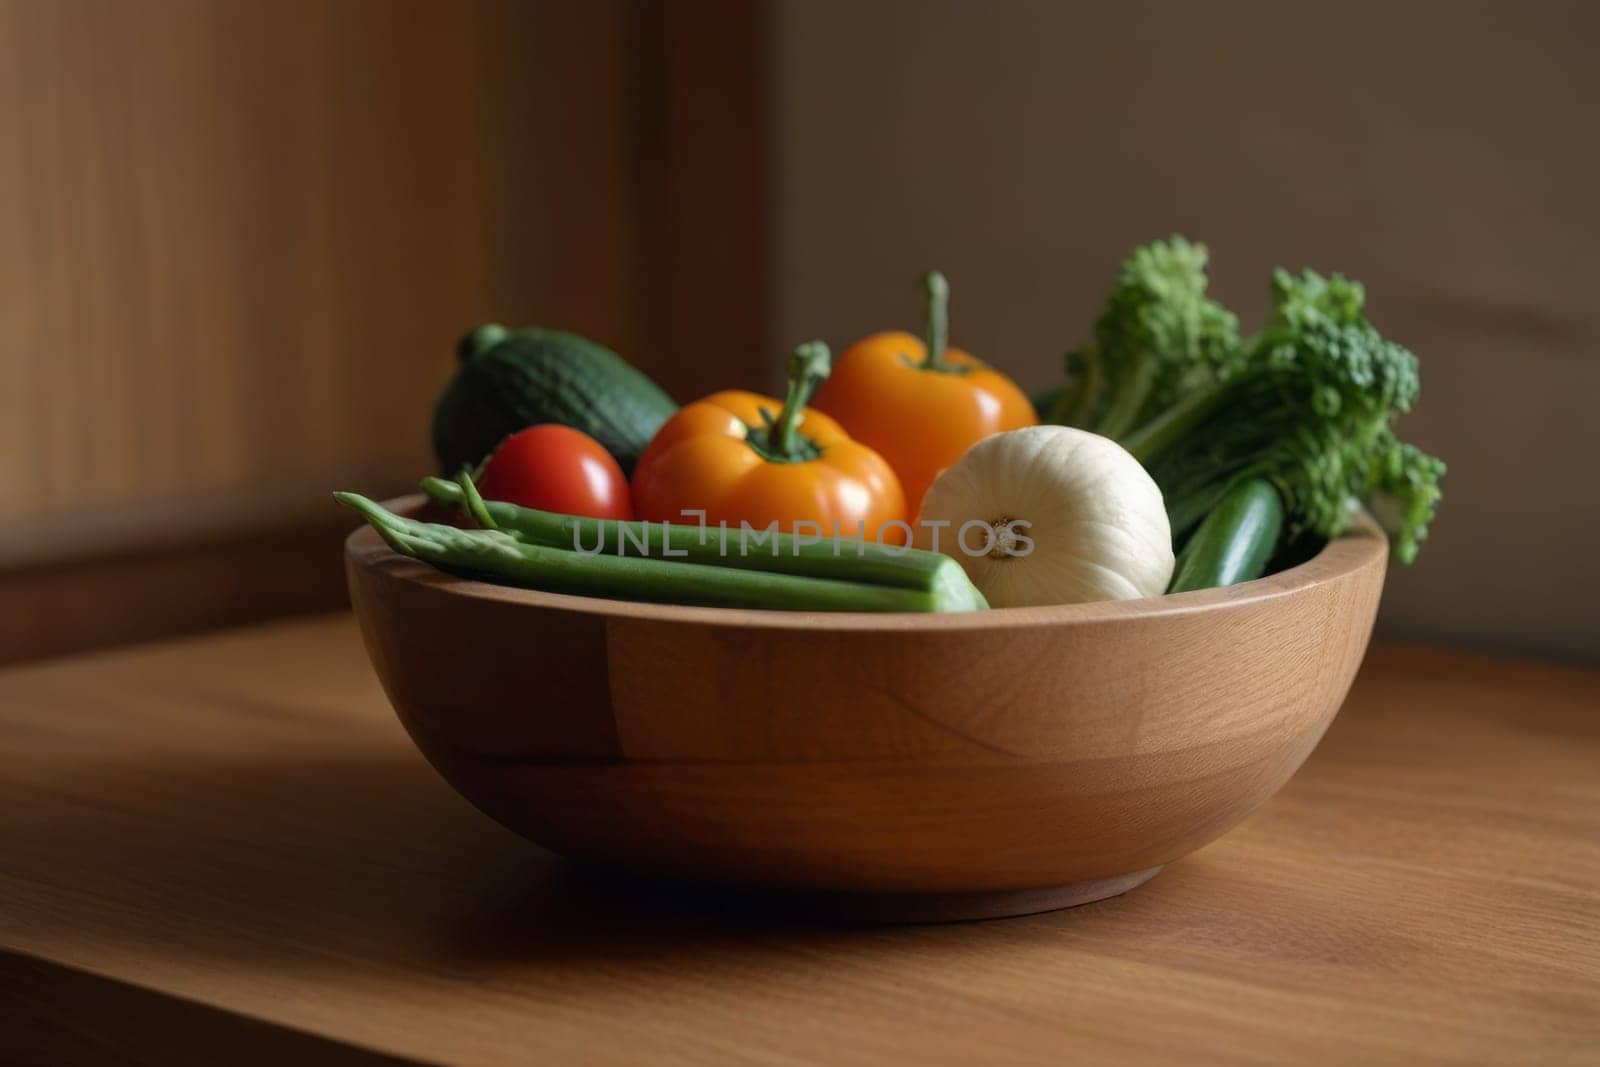 Explore the allure of fresh vegetables nestled in a wooden bowl on a kitchen counter, embodying the charm of homegrown and organic goodness.